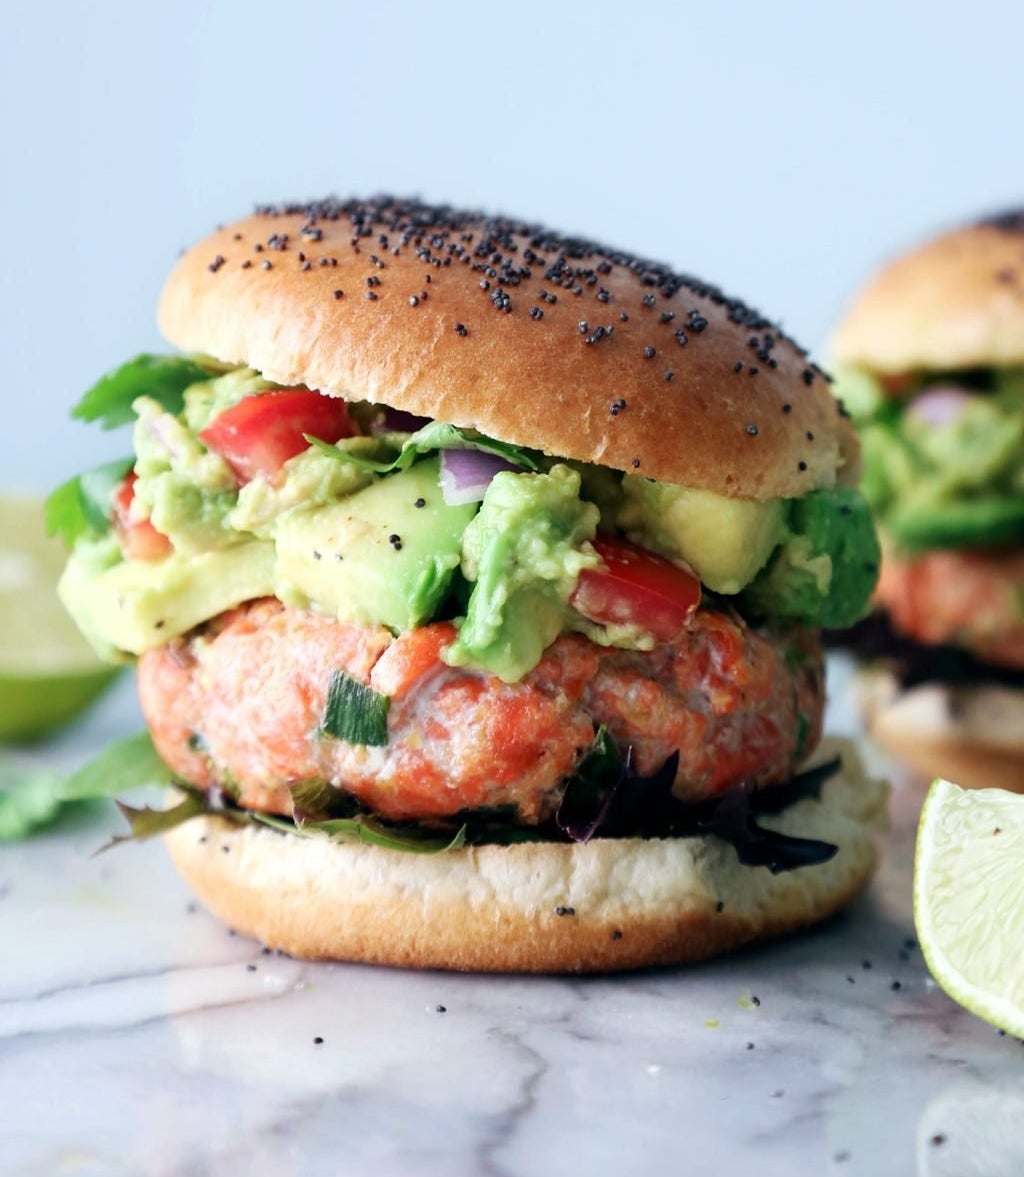 A hamburger bun filled with a thick salmon patty topped with chunky guacamole and diced tomatoes.